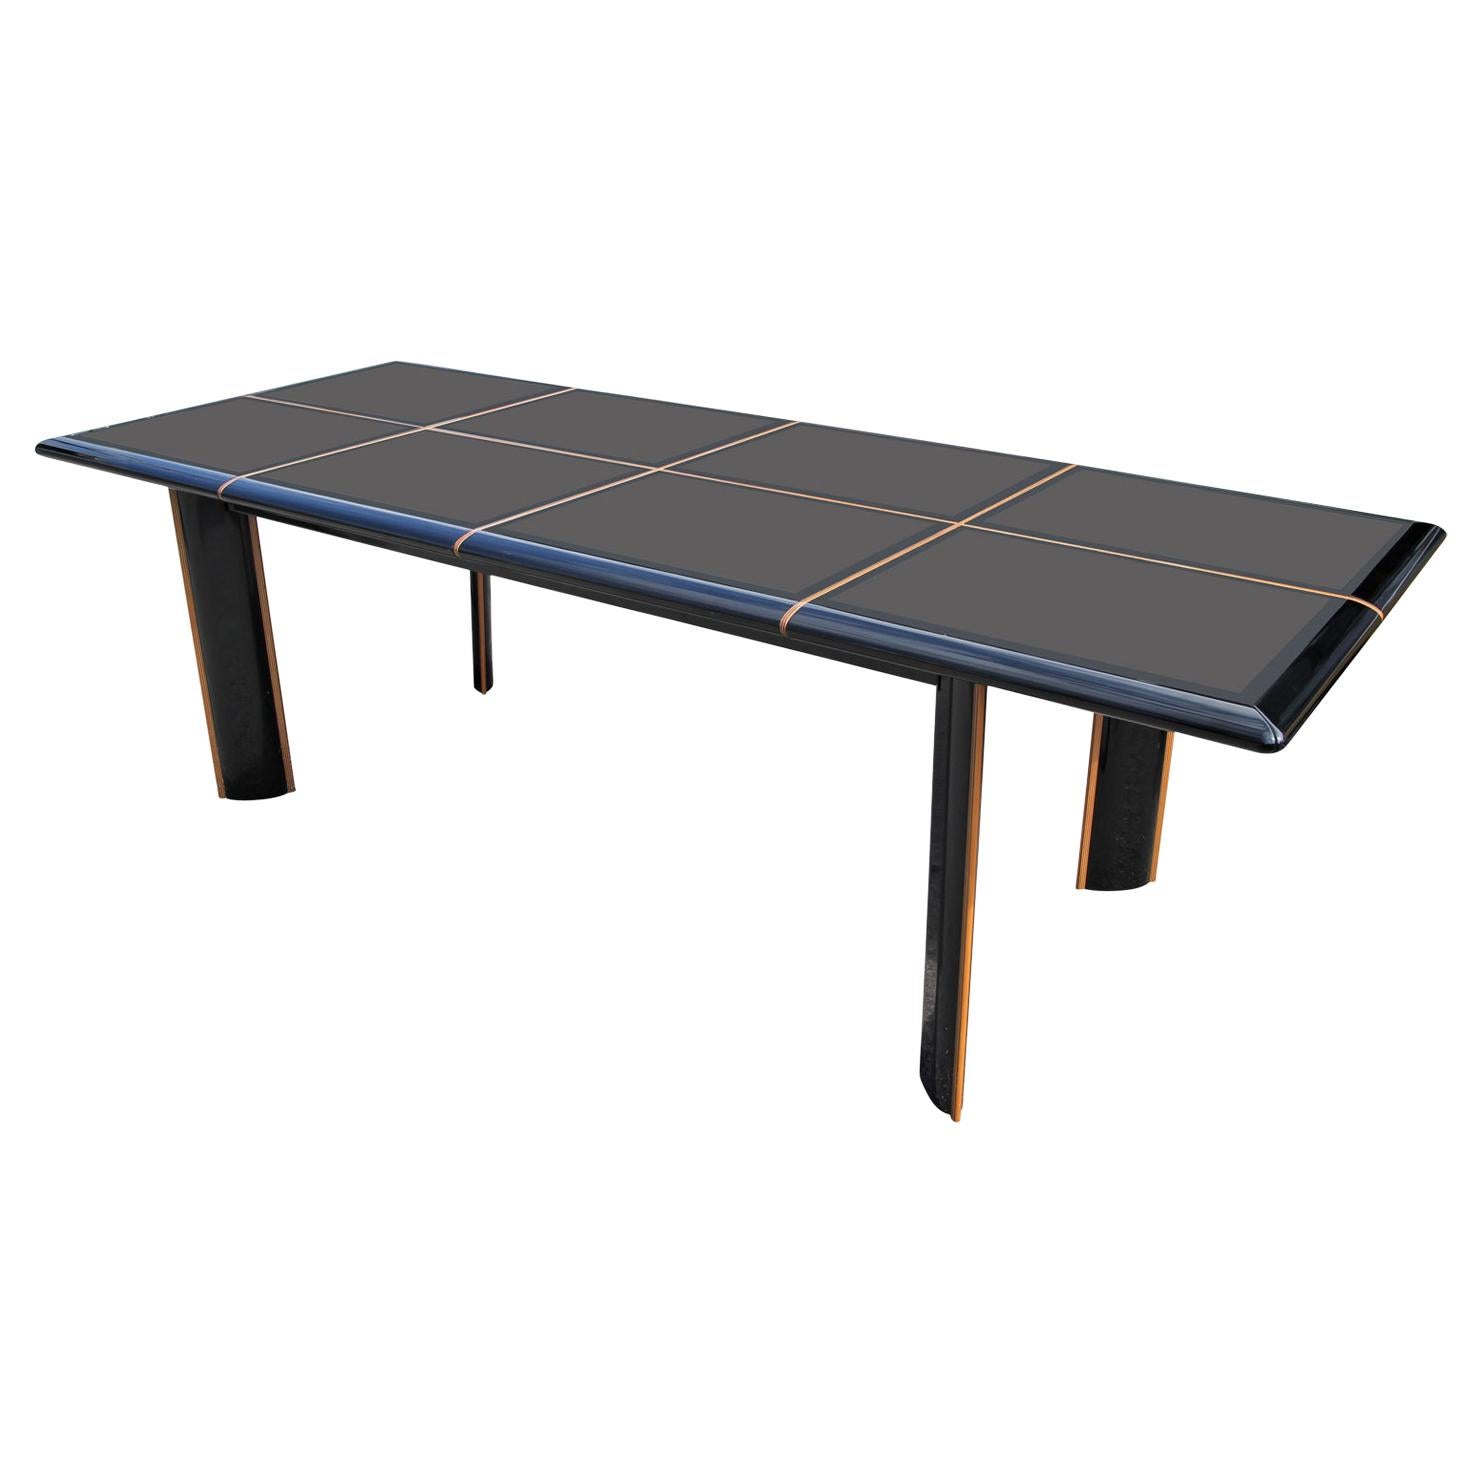 Roche Bobois for Pierre Cardin Italian High Gloss Black Lacquer Dining Table